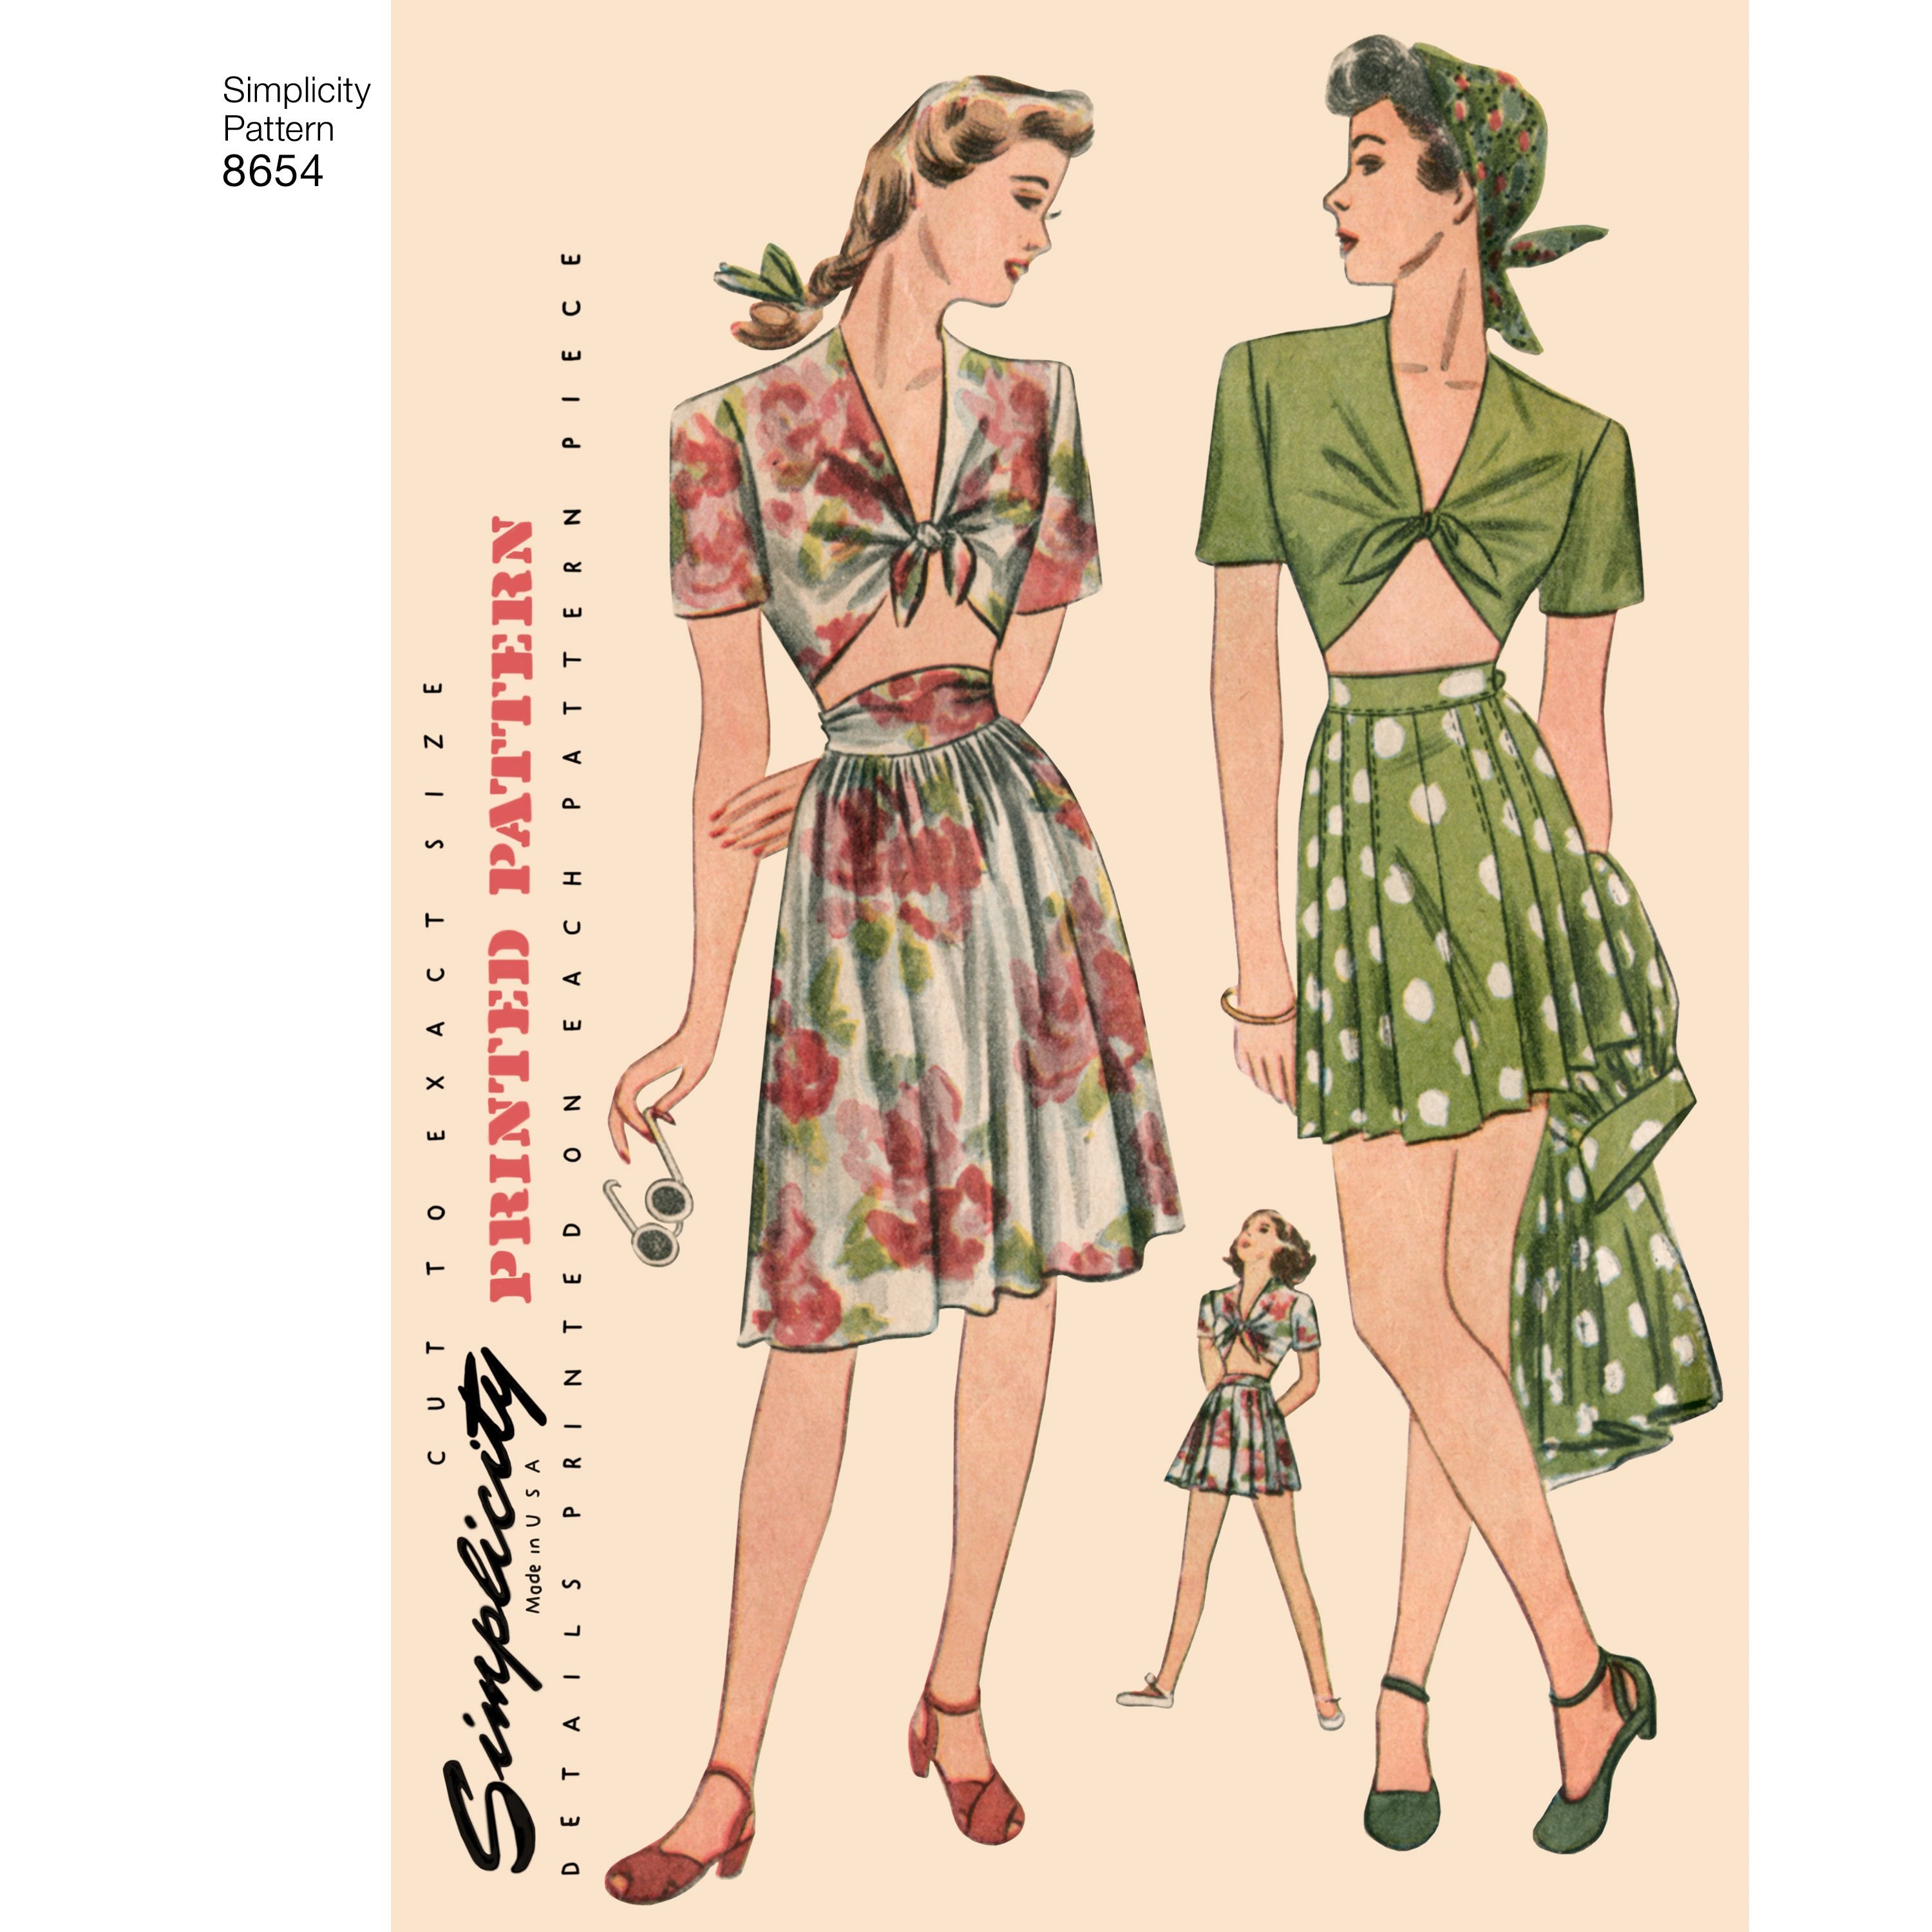 Simplicity Pattern 8654 Vintage short sleeved top from Jaycotts Sewing Supplies